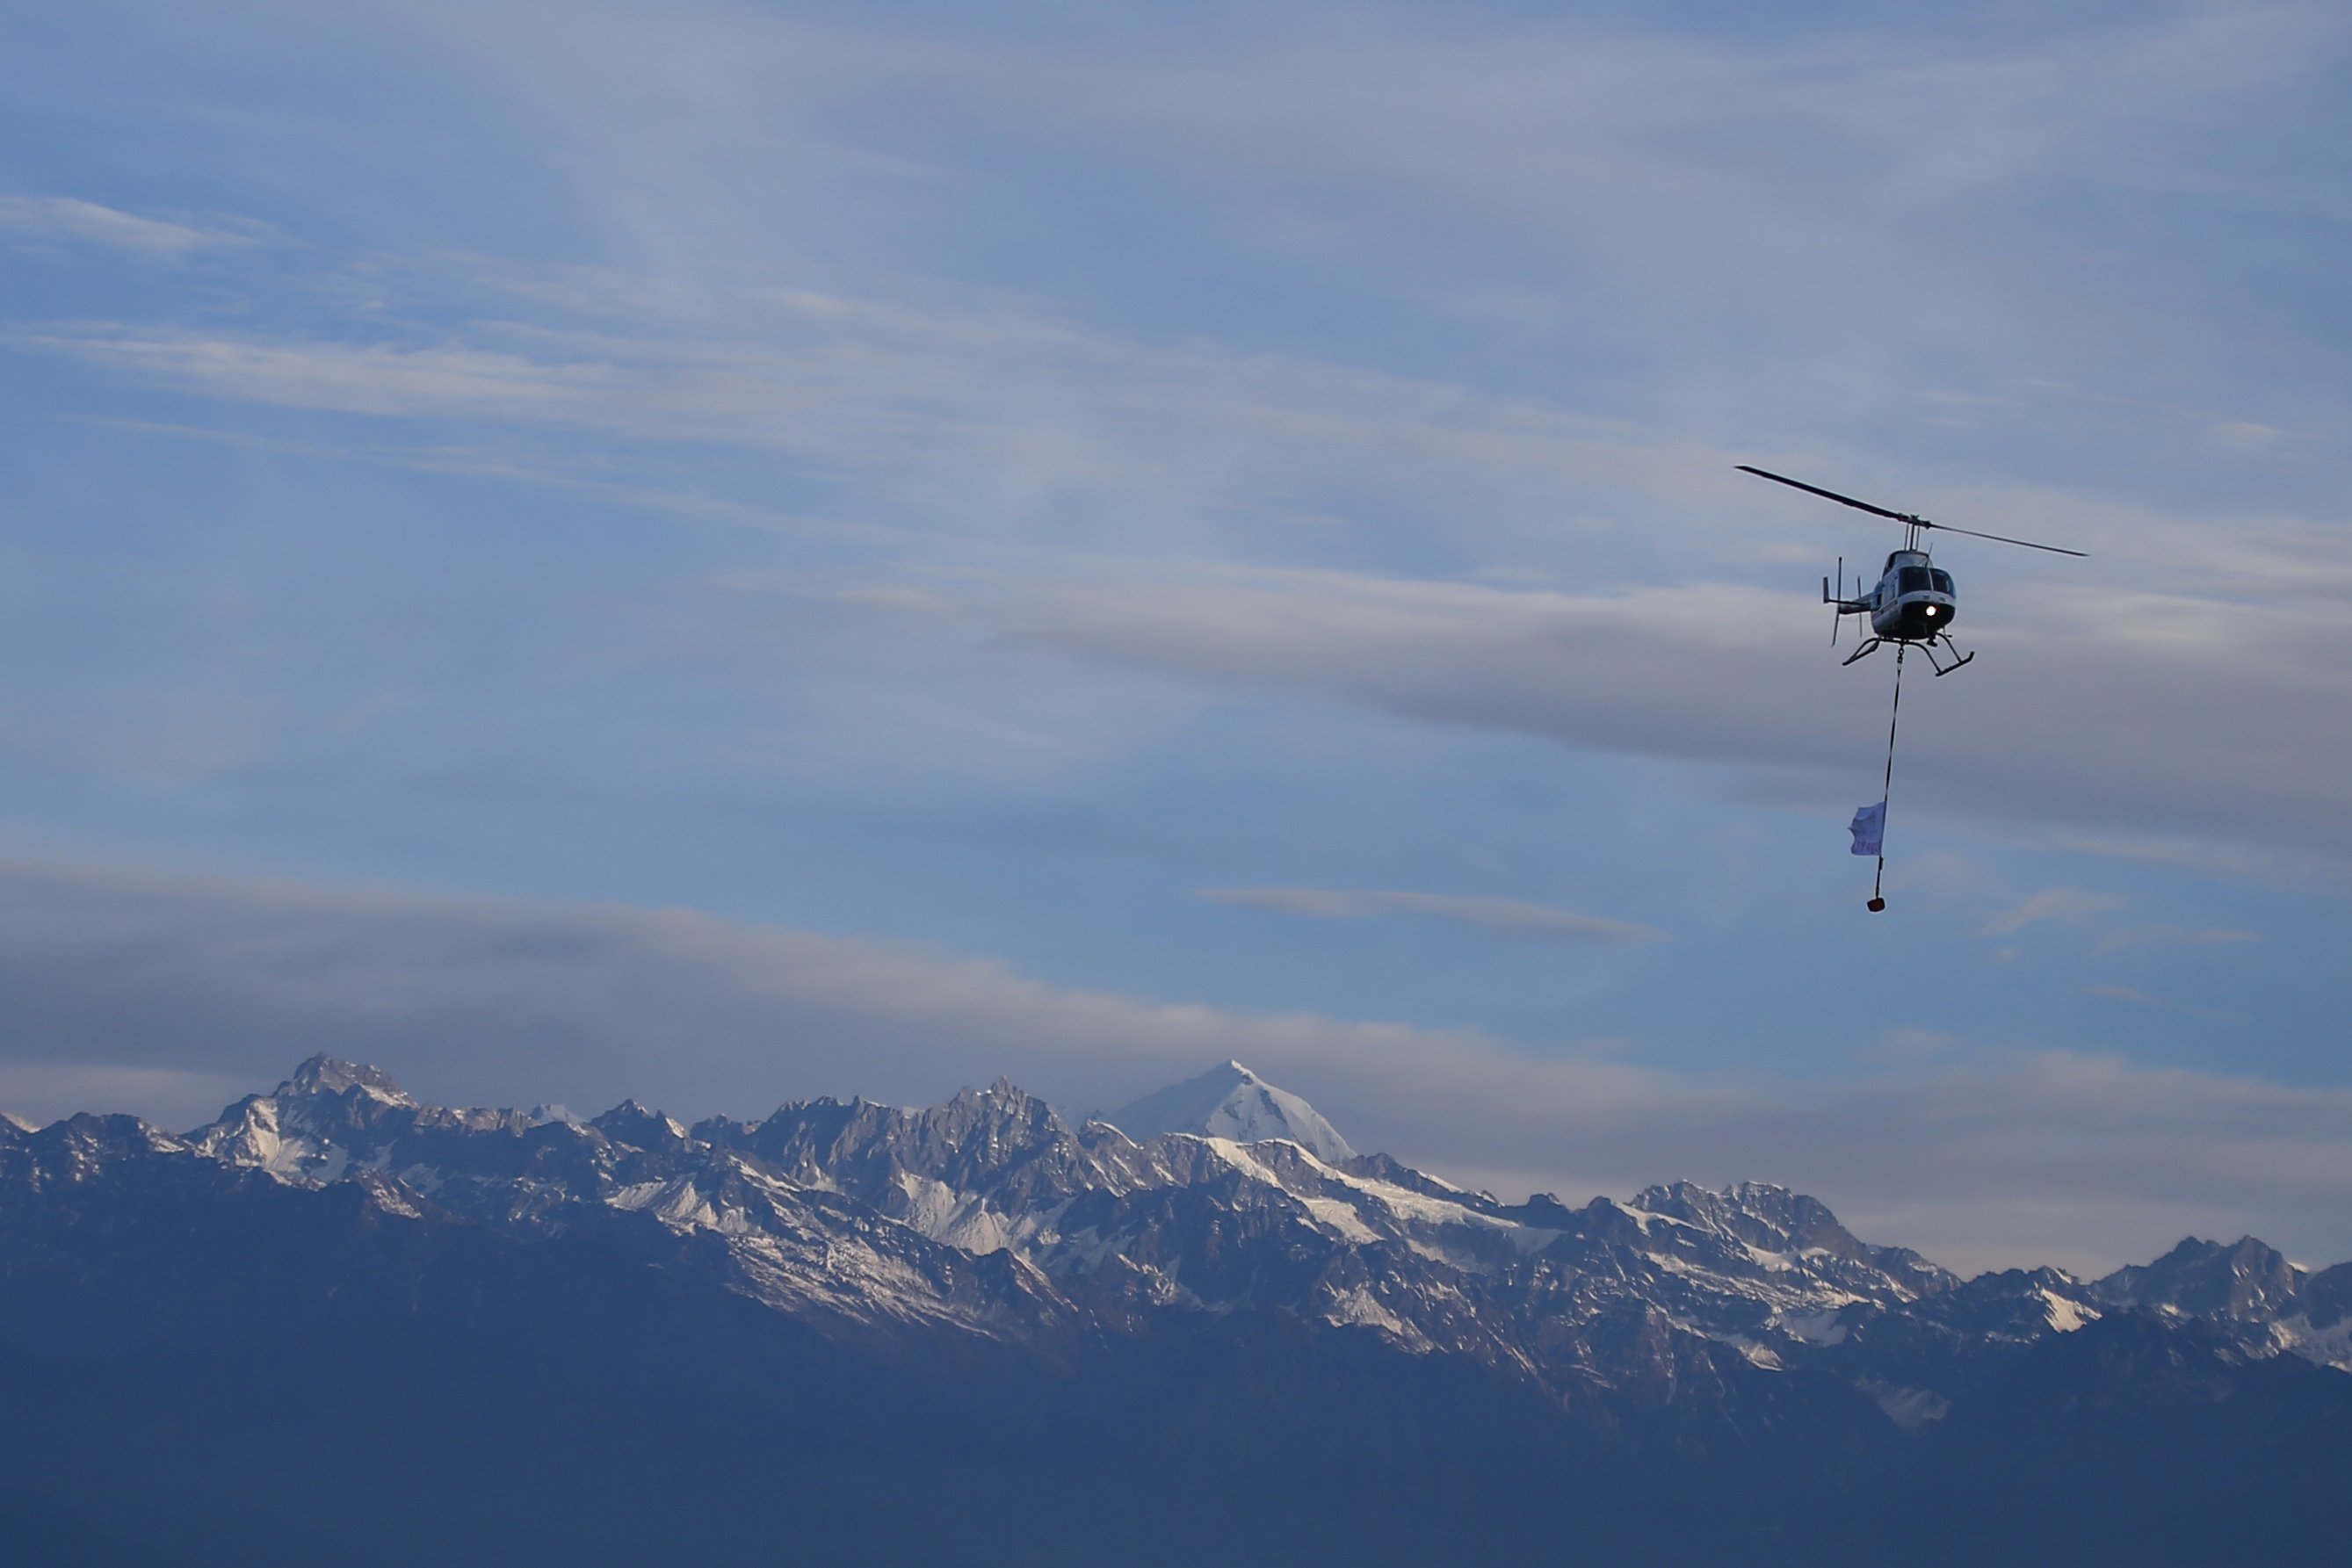 A helicopter showering flowers is pictured against the backdrop of a mountain range during the Visit Nepal-2020 New Year campaign, at Nagarkot, on Wednesday, January 1, 2020. Photo: Skanda Gautam/THT